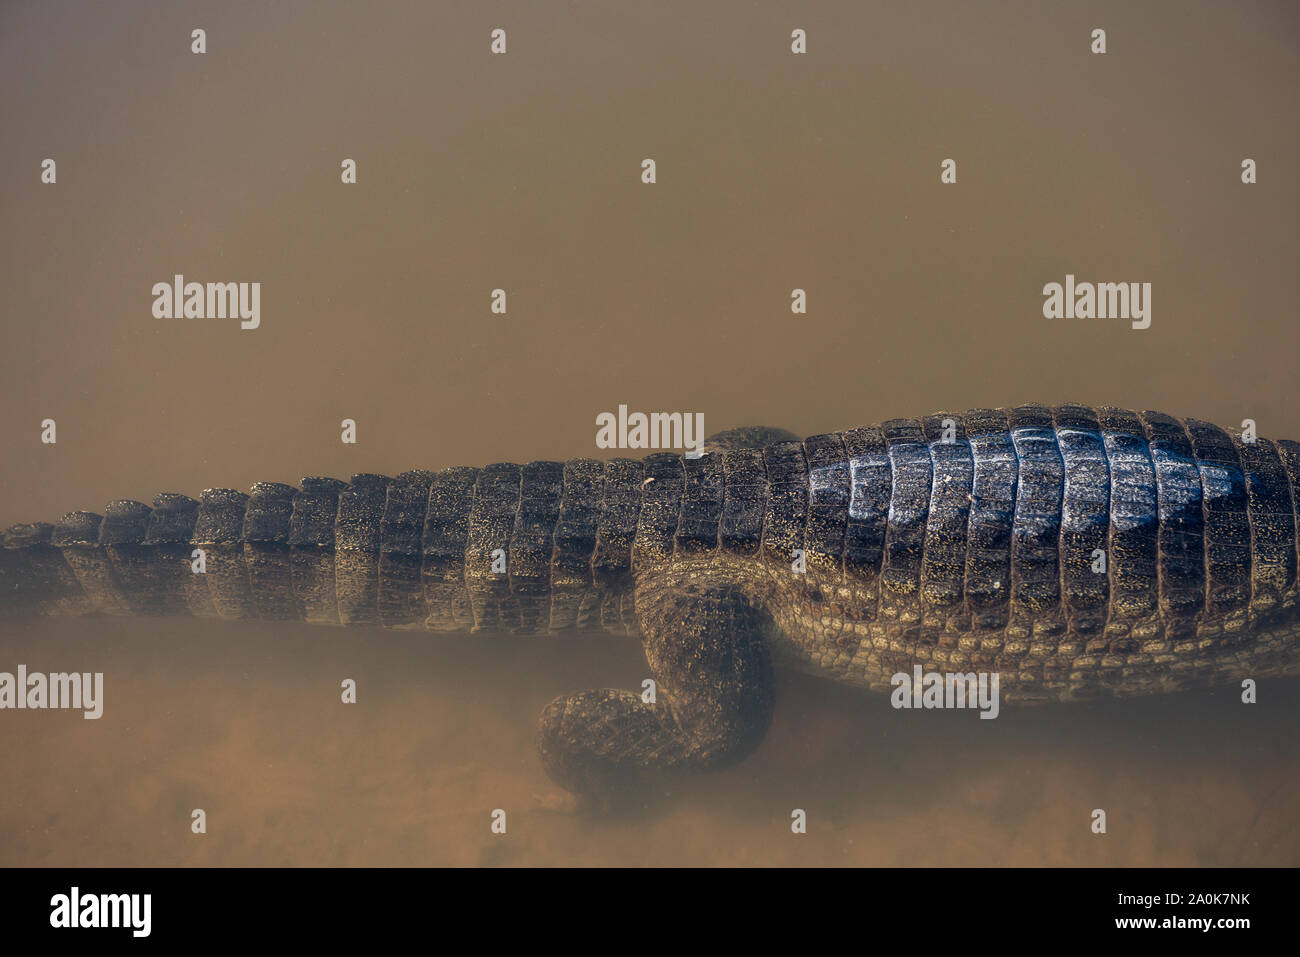 Abstraction of an alligator on river in Brazilian Pantanal Stock Photo